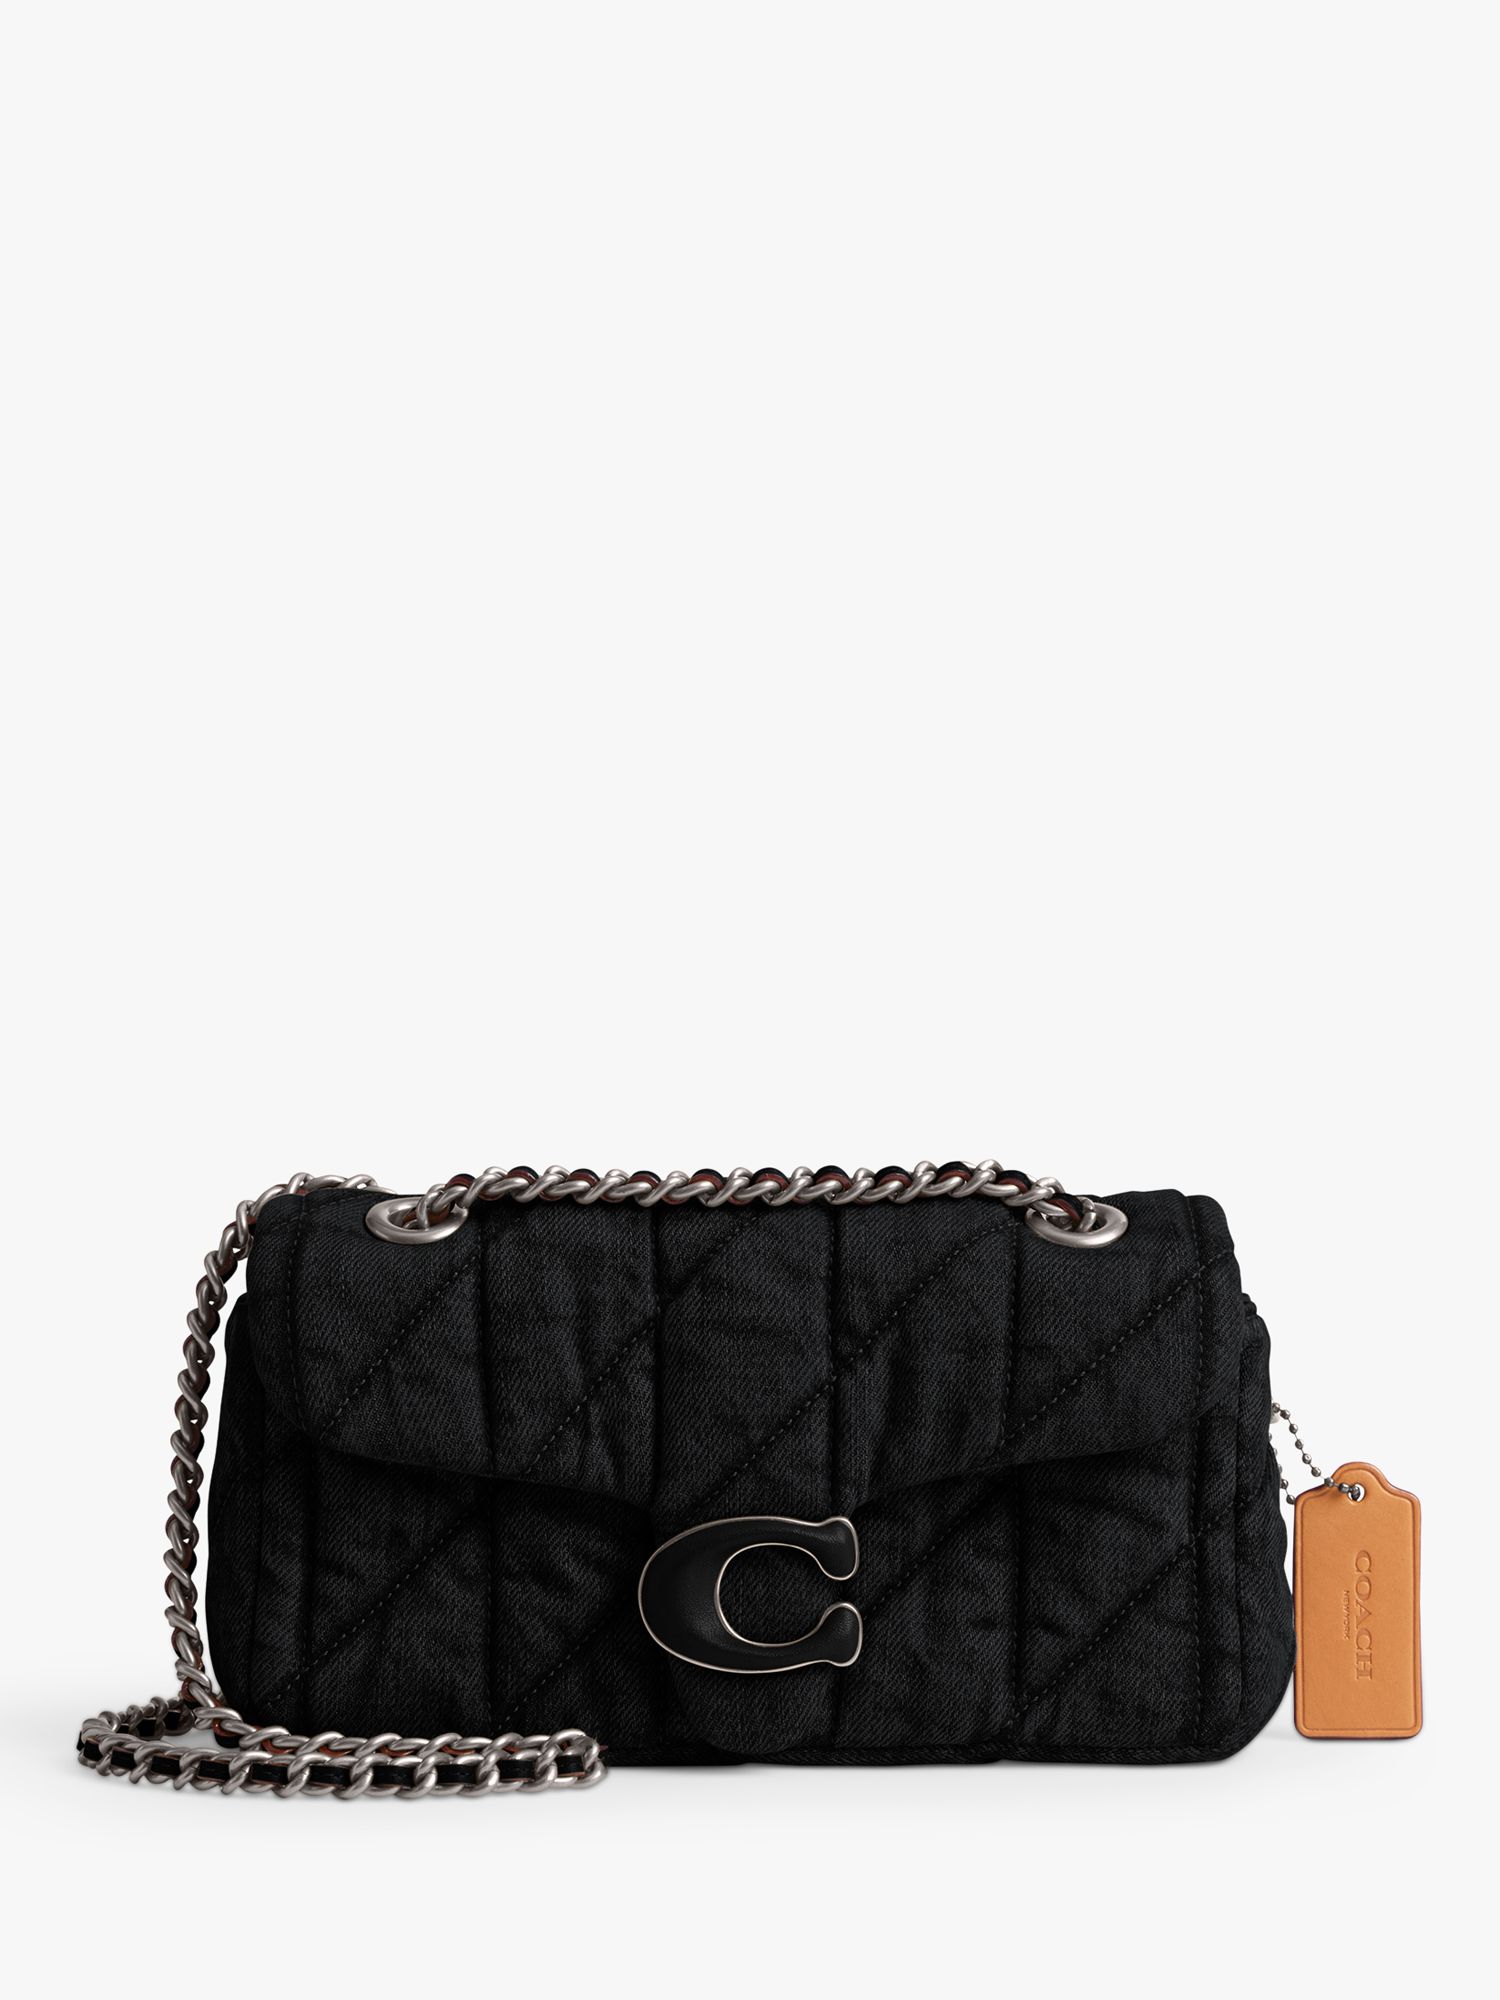 Coach Tabby 20 Quilted Denim Cross Body Bag, Black at John Lewis & Partners